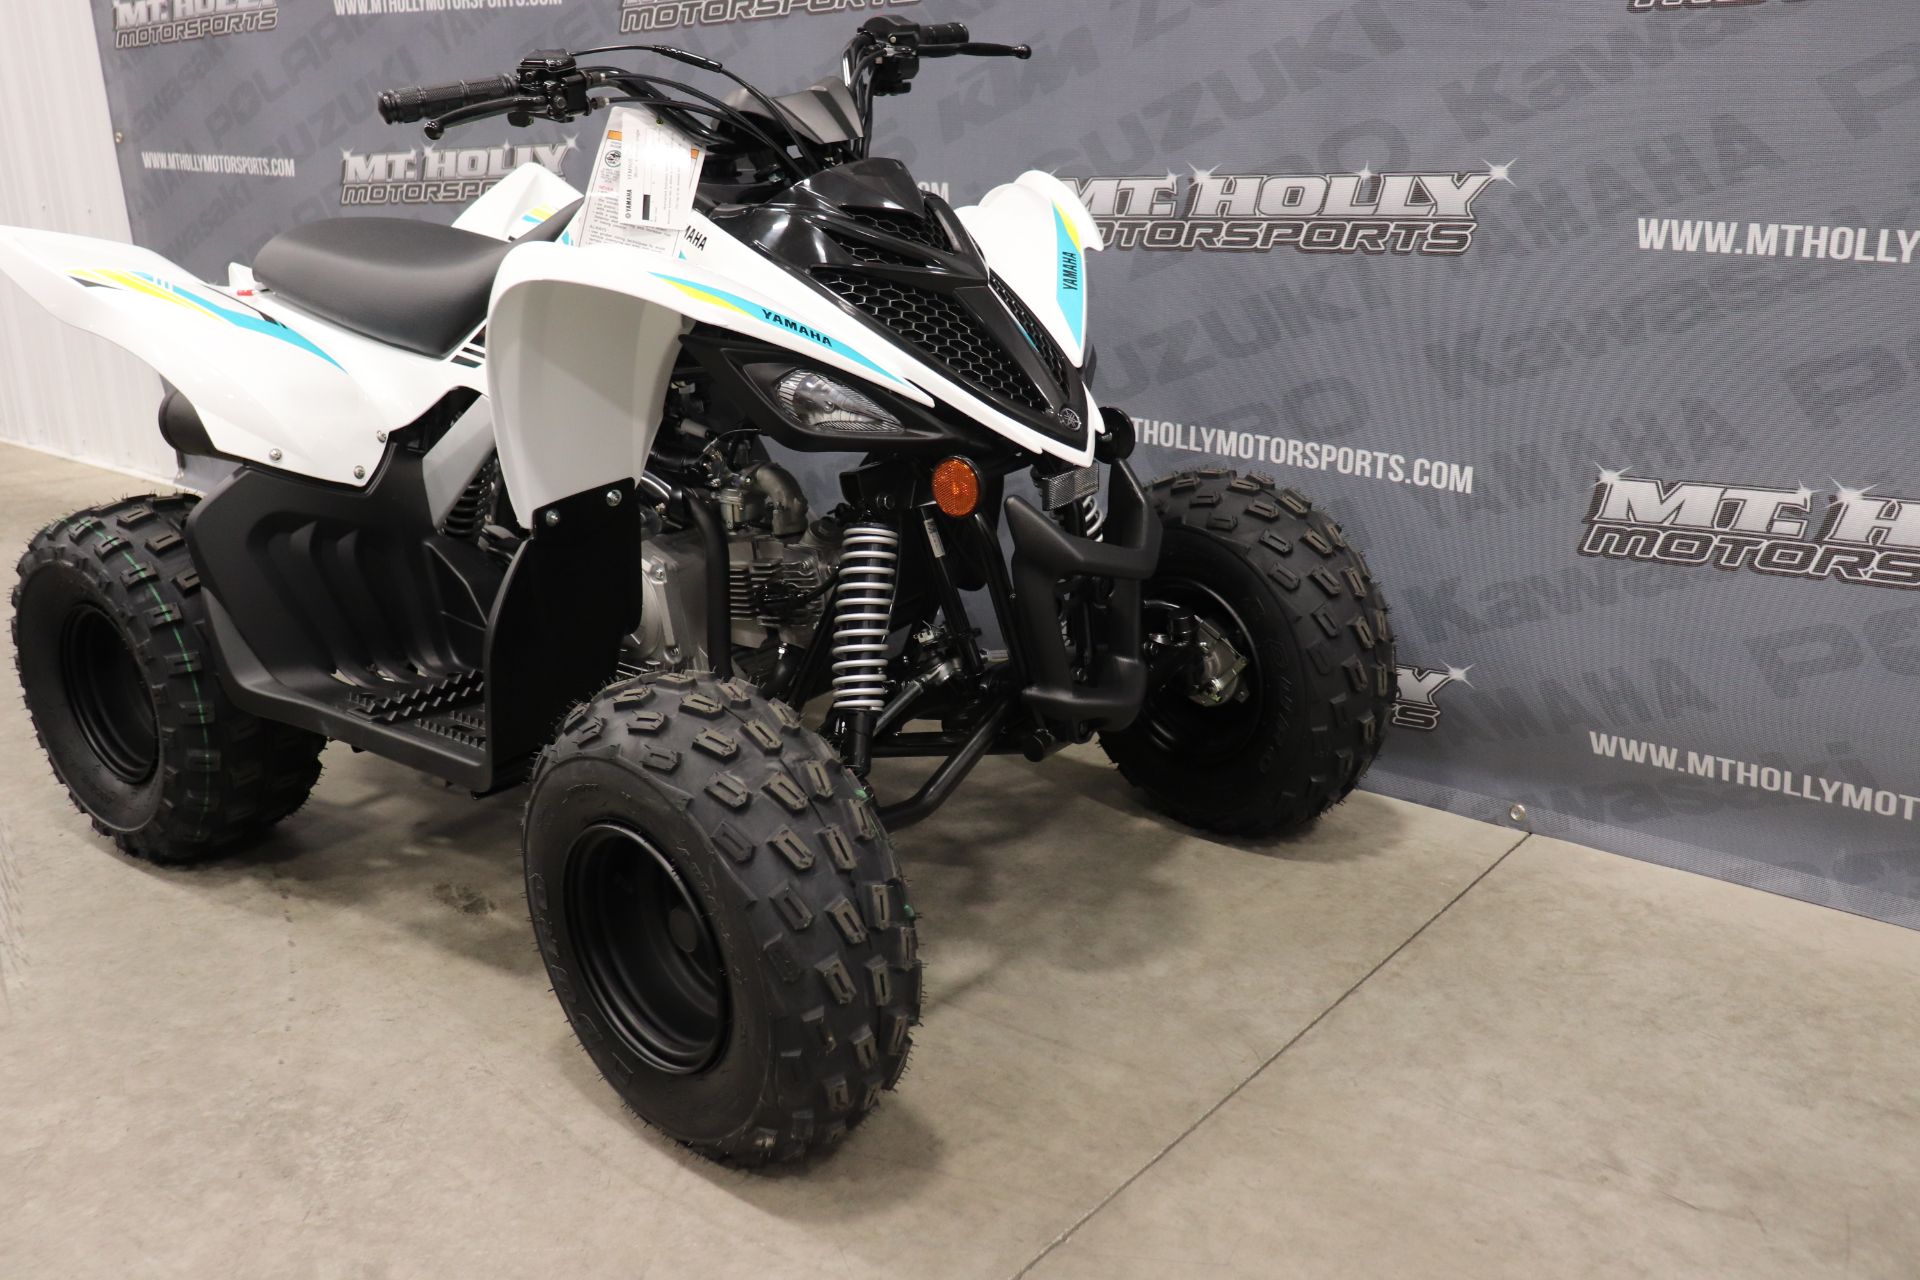 2022 Yamaha Raptor 90 in Vincentown, New Jersey - Photo 2